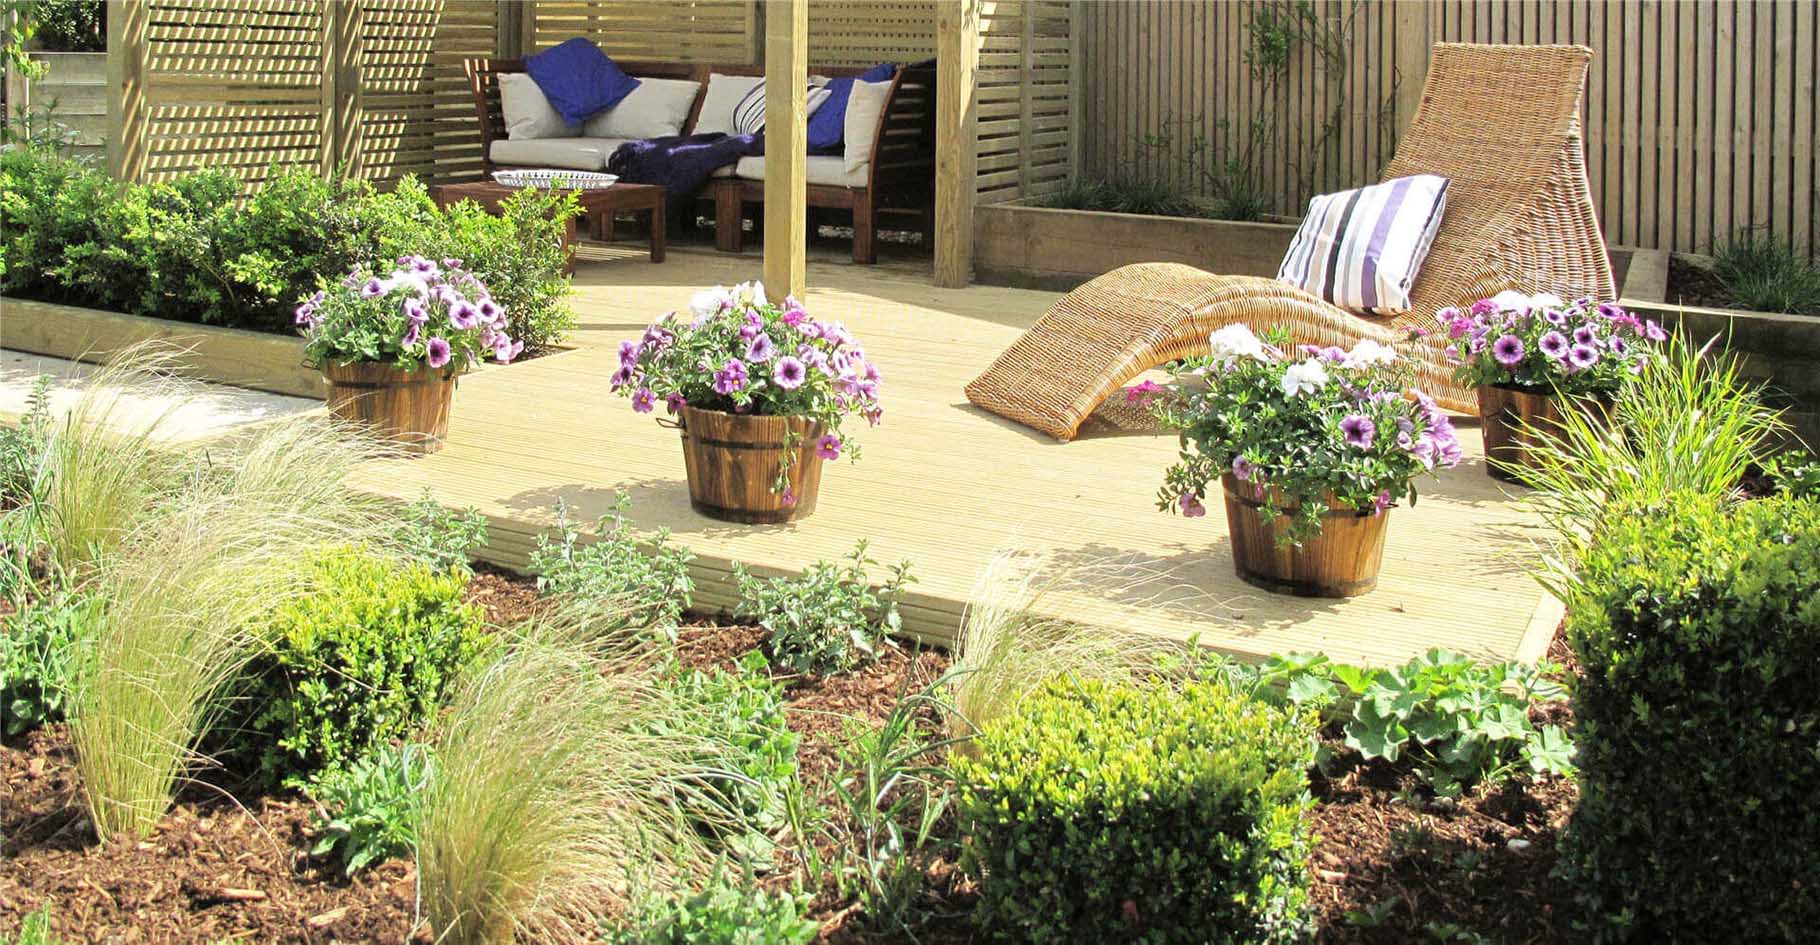 Decking covering unsightly concrete